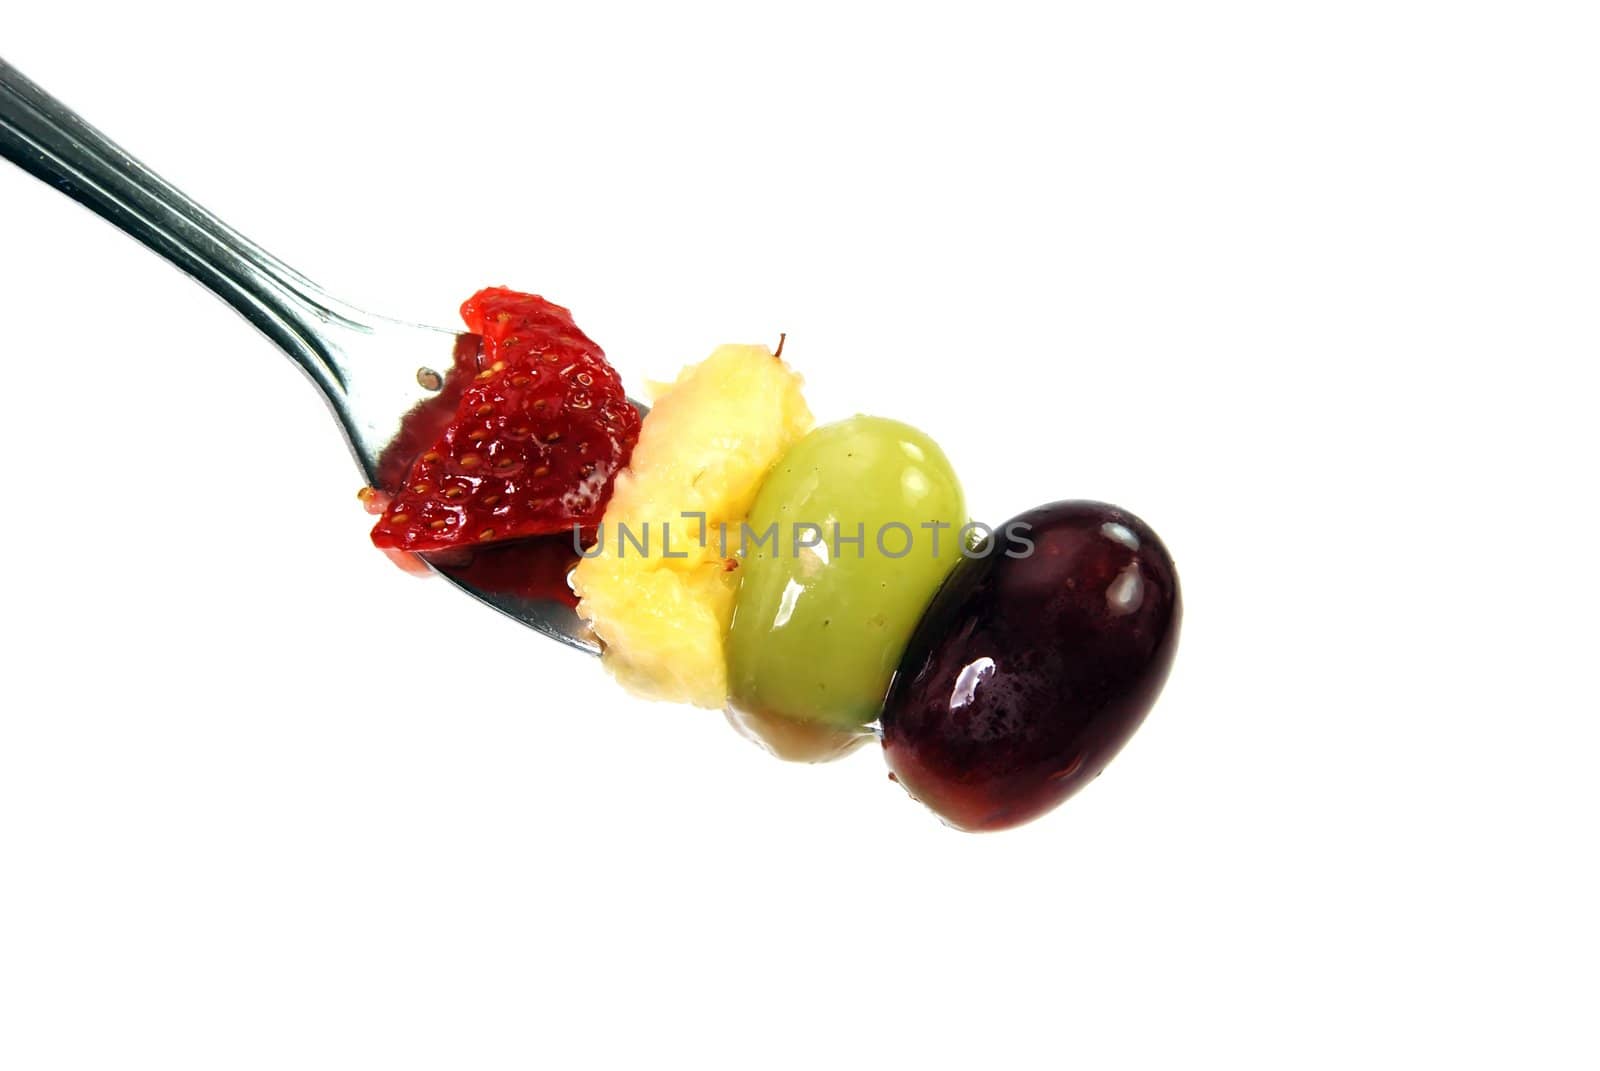 Fruit on fork isolated on white background with clipping path.